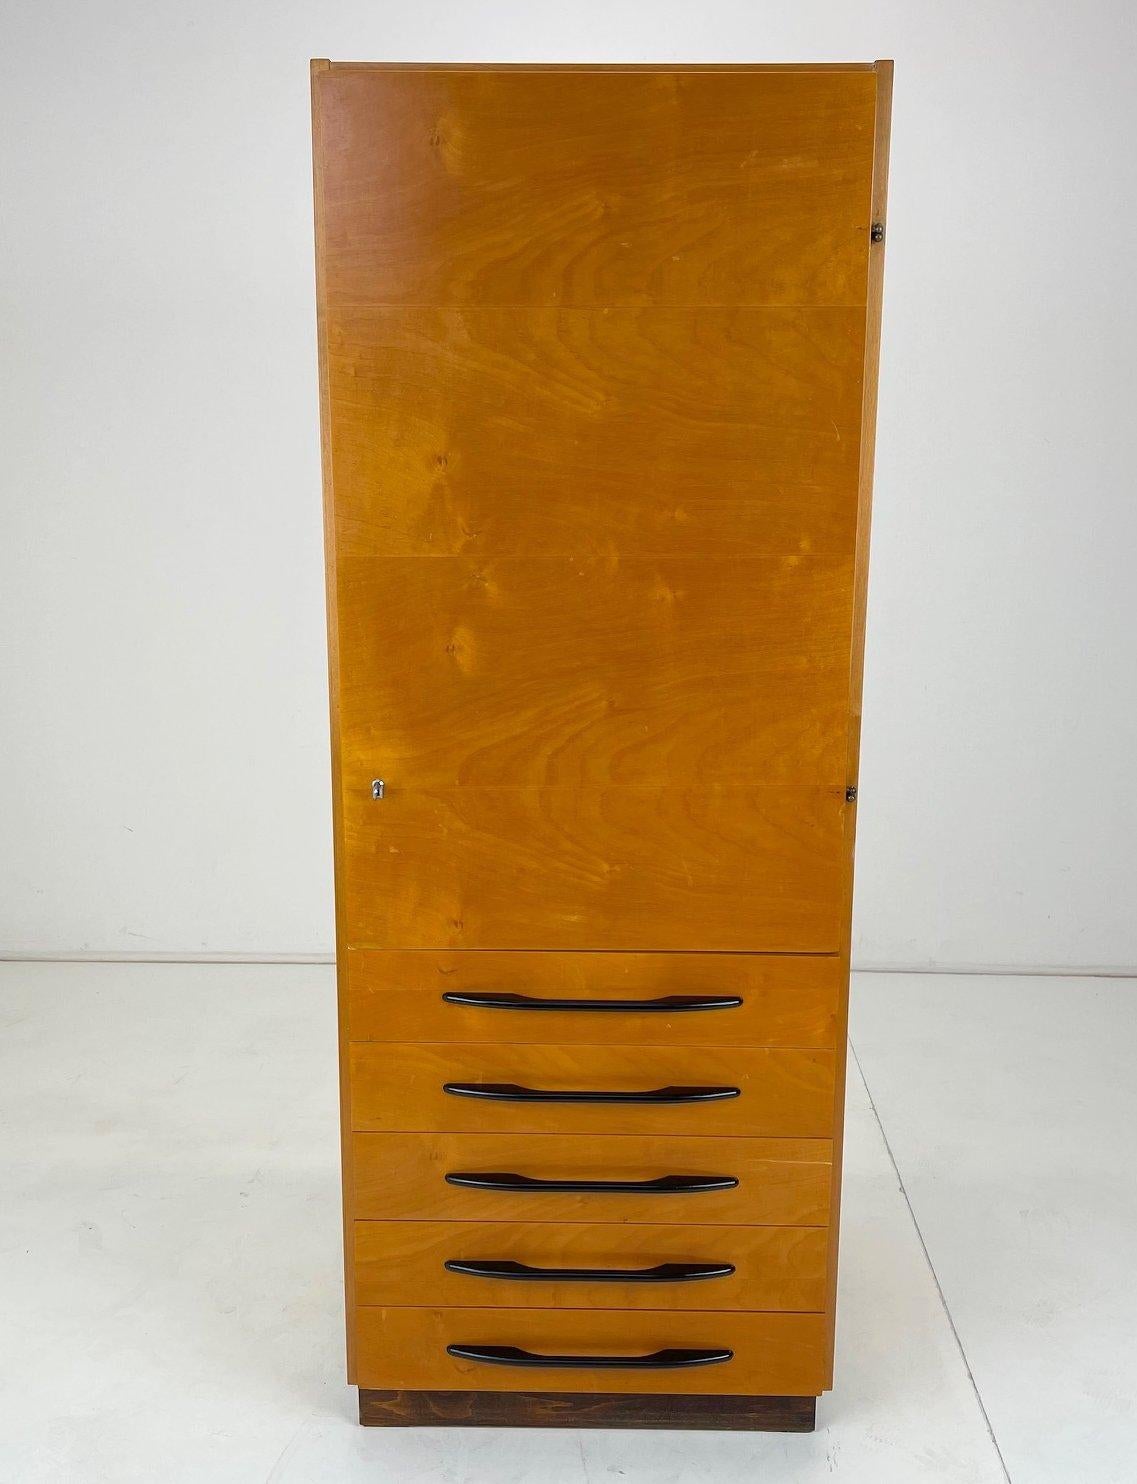 Vintage cabinet designed by architect Mojmír Požár and produced in UP Závody in former Czechoslovakia in the 1950's.